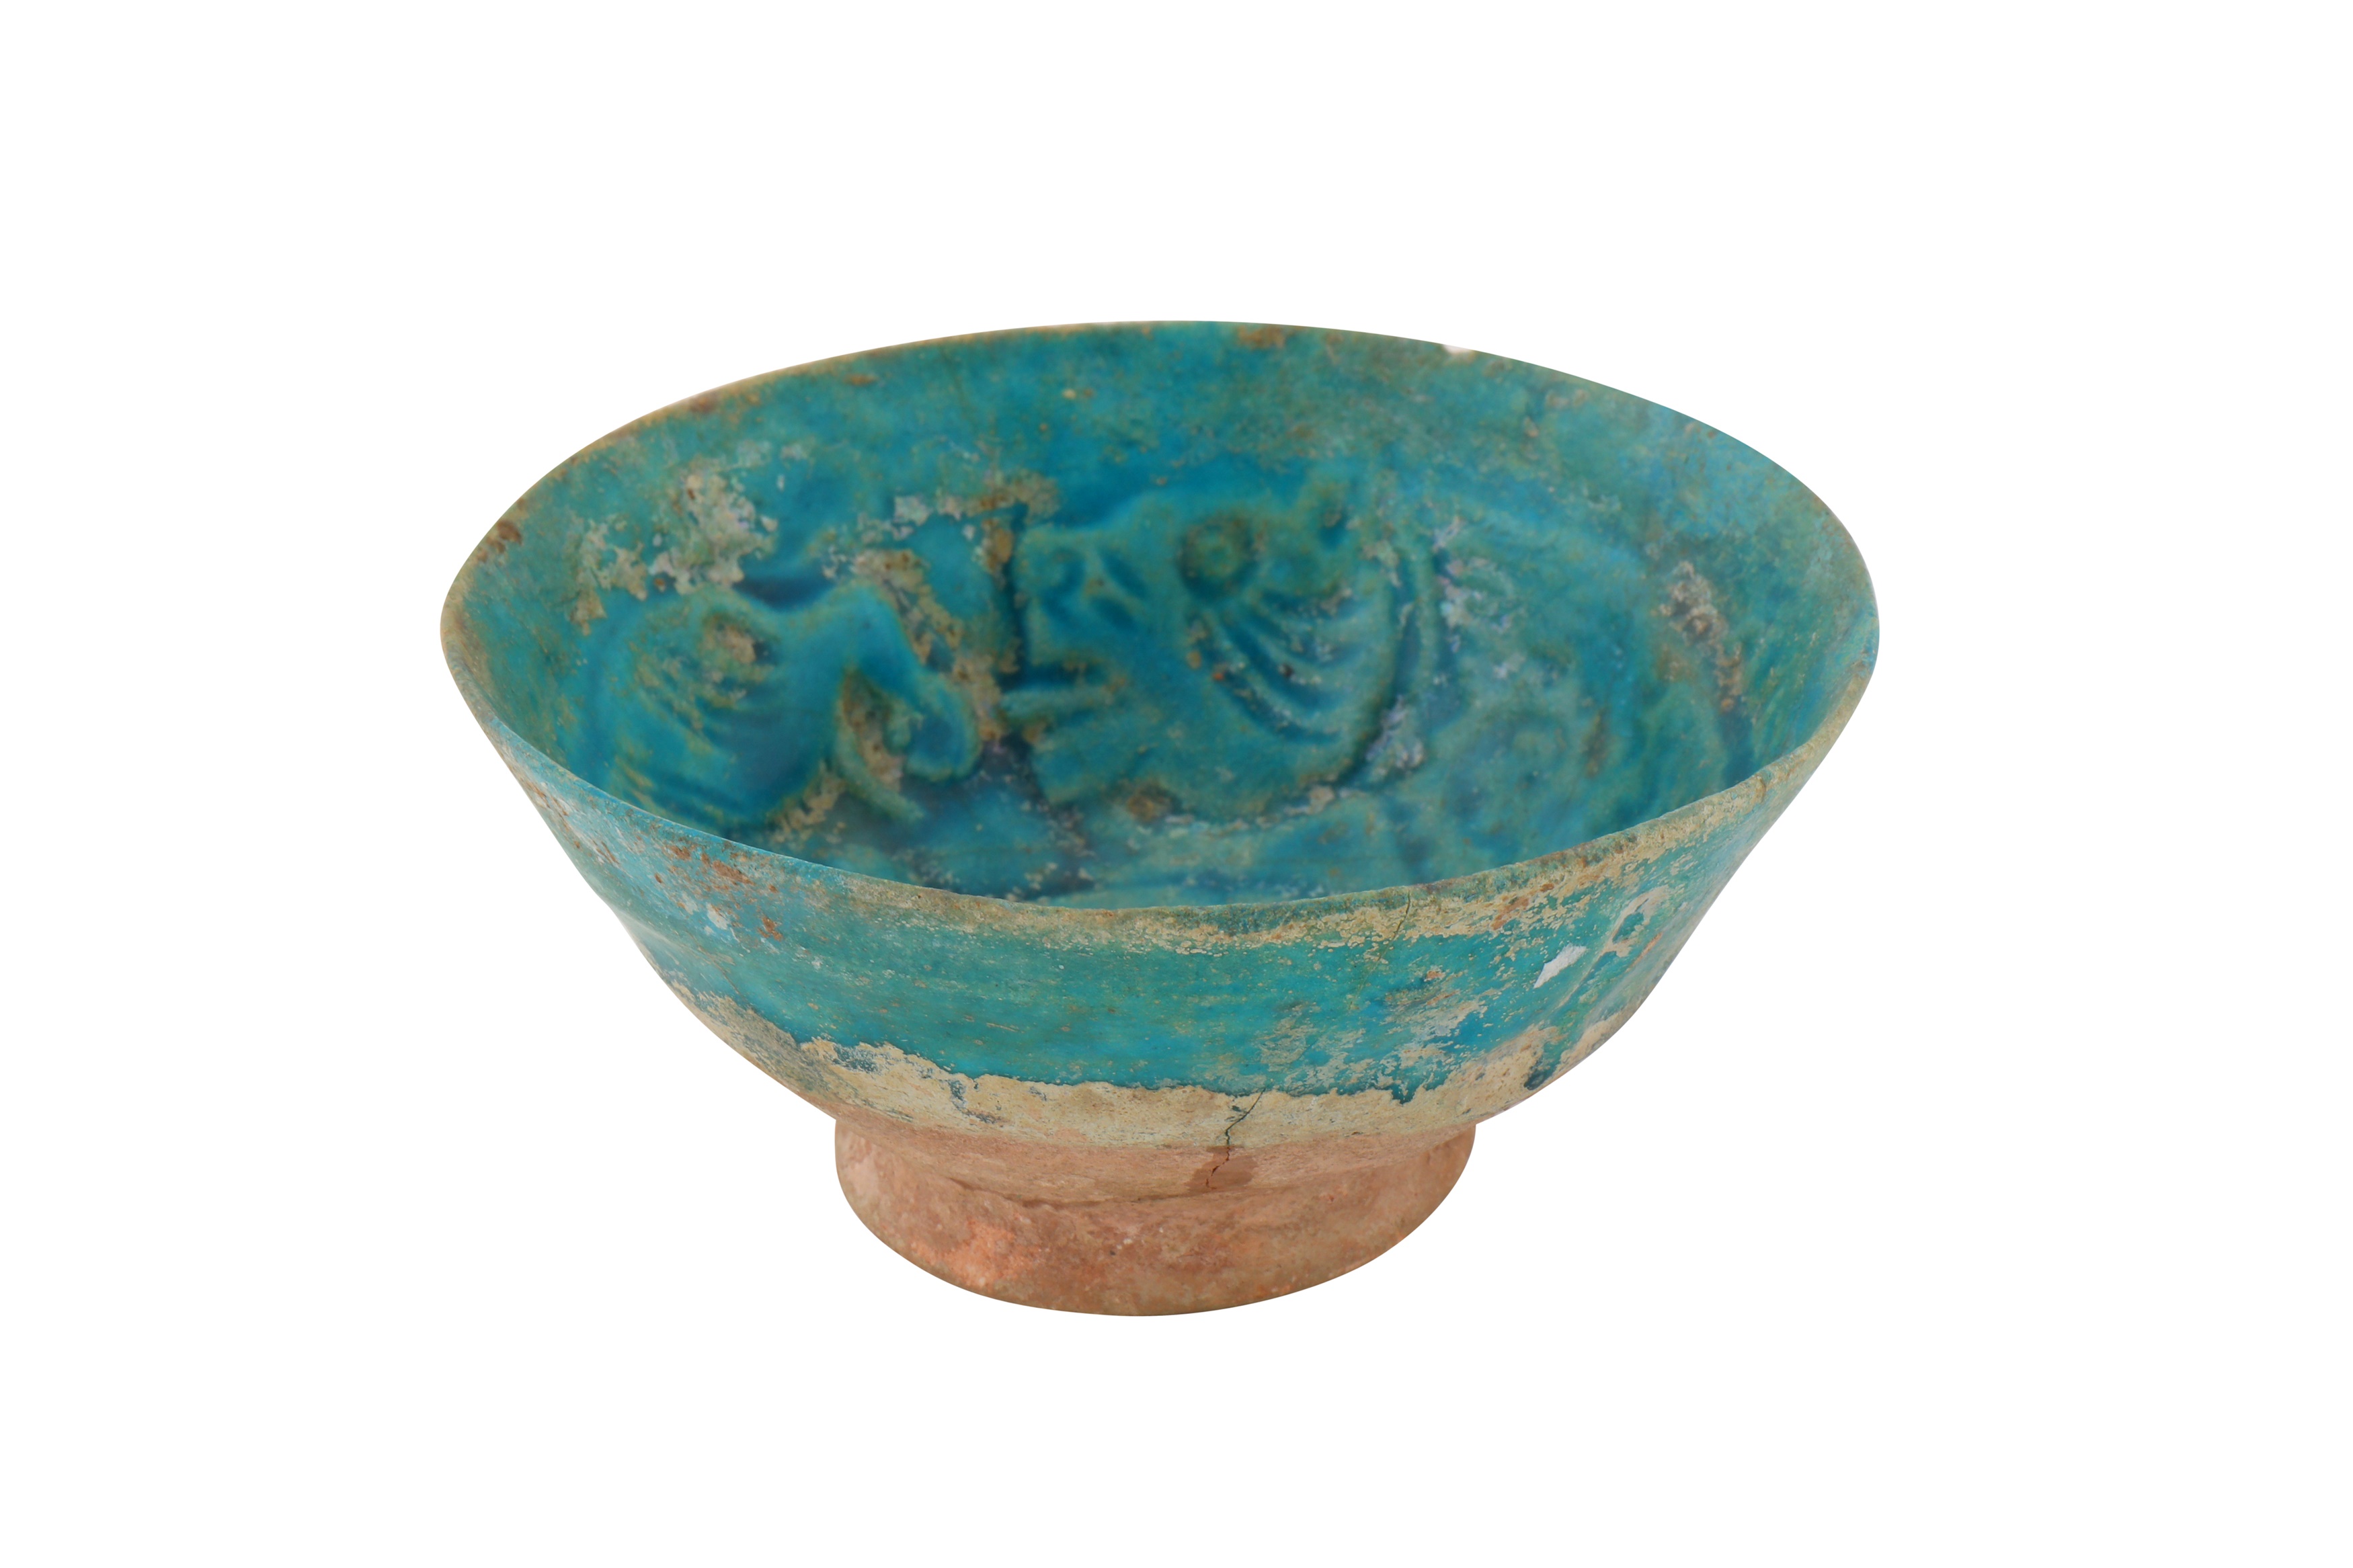 A 12TH-13TH CENTURY PERSIAN KASHAN TURQUOISE GLAZED POTTERY BOWL - Image 3 of 4